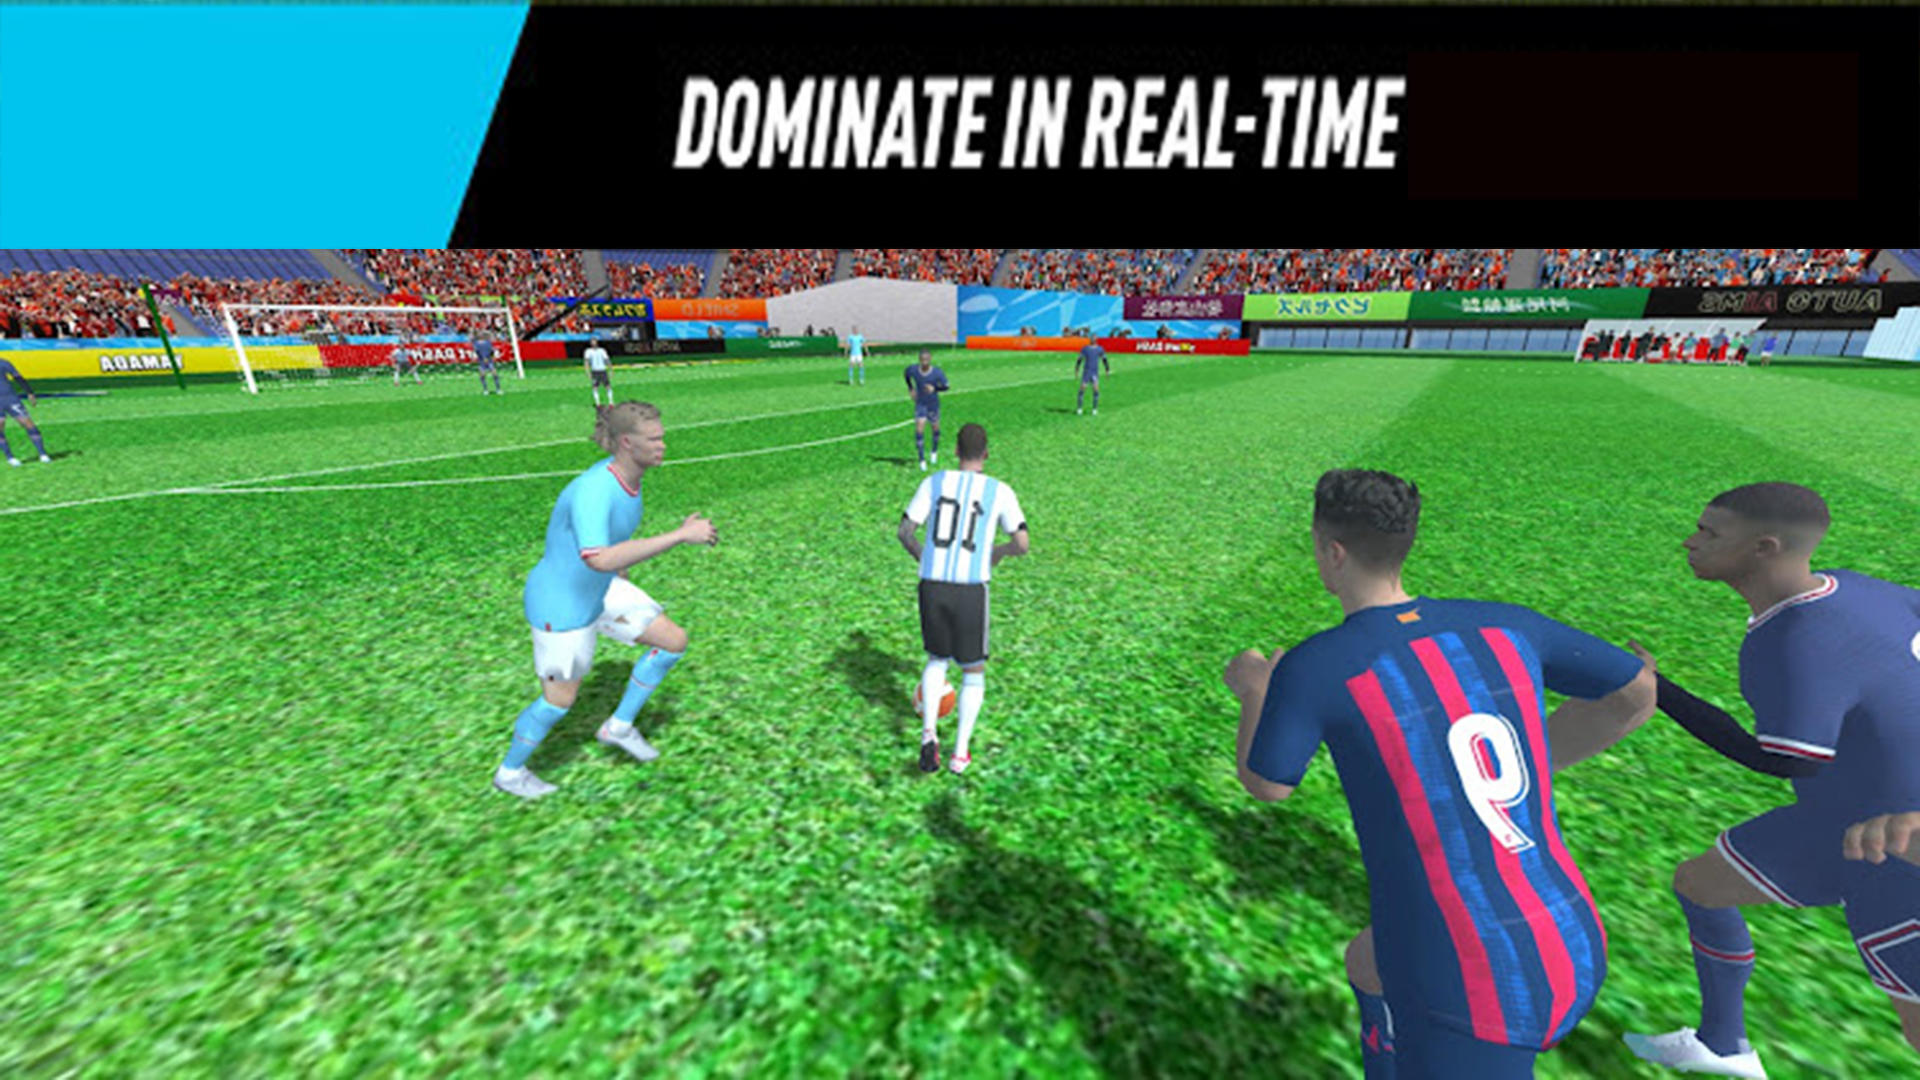 Play Penalty Shooters 2,The Ultimate Football Penalty Shootout Game Online  for PC,No Download